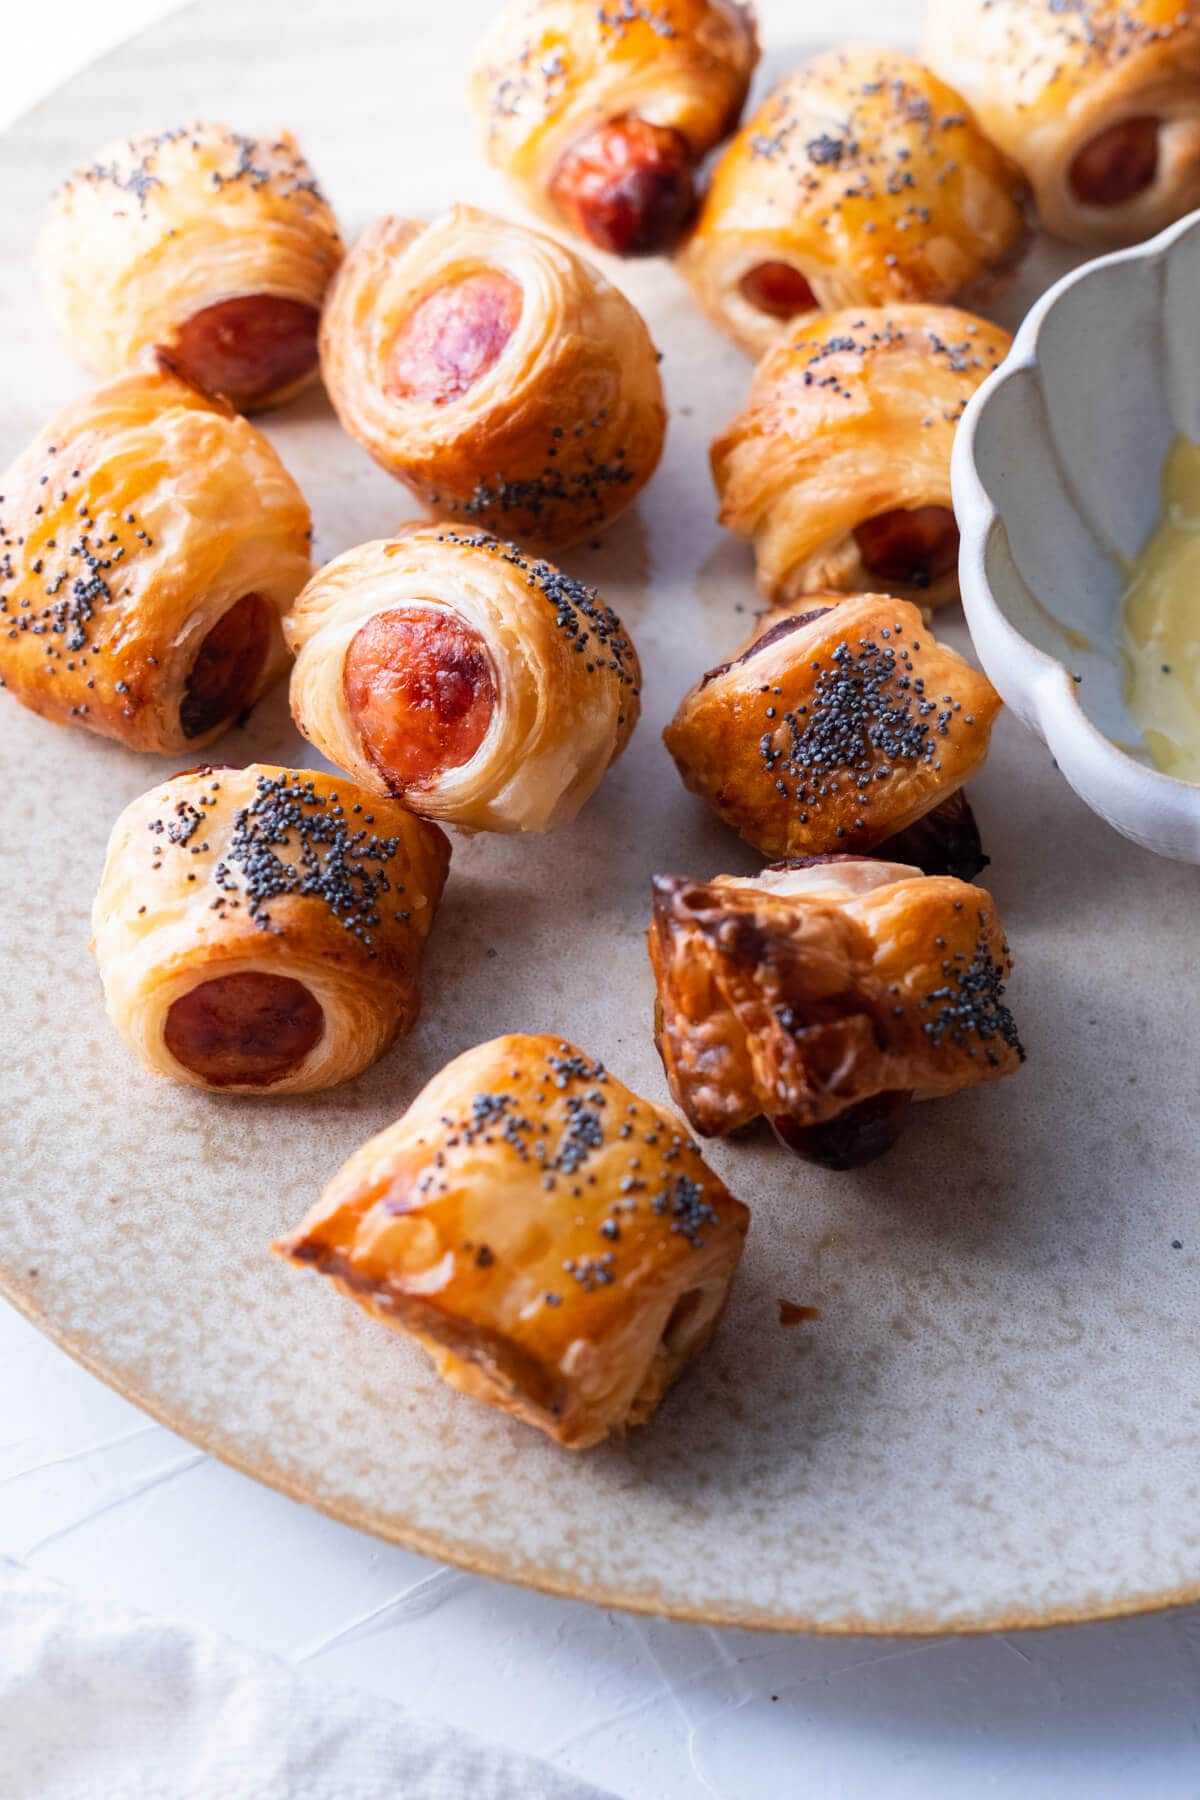 Pigs in blankets with juicy hot dogs wrapped in flaky pastry. 